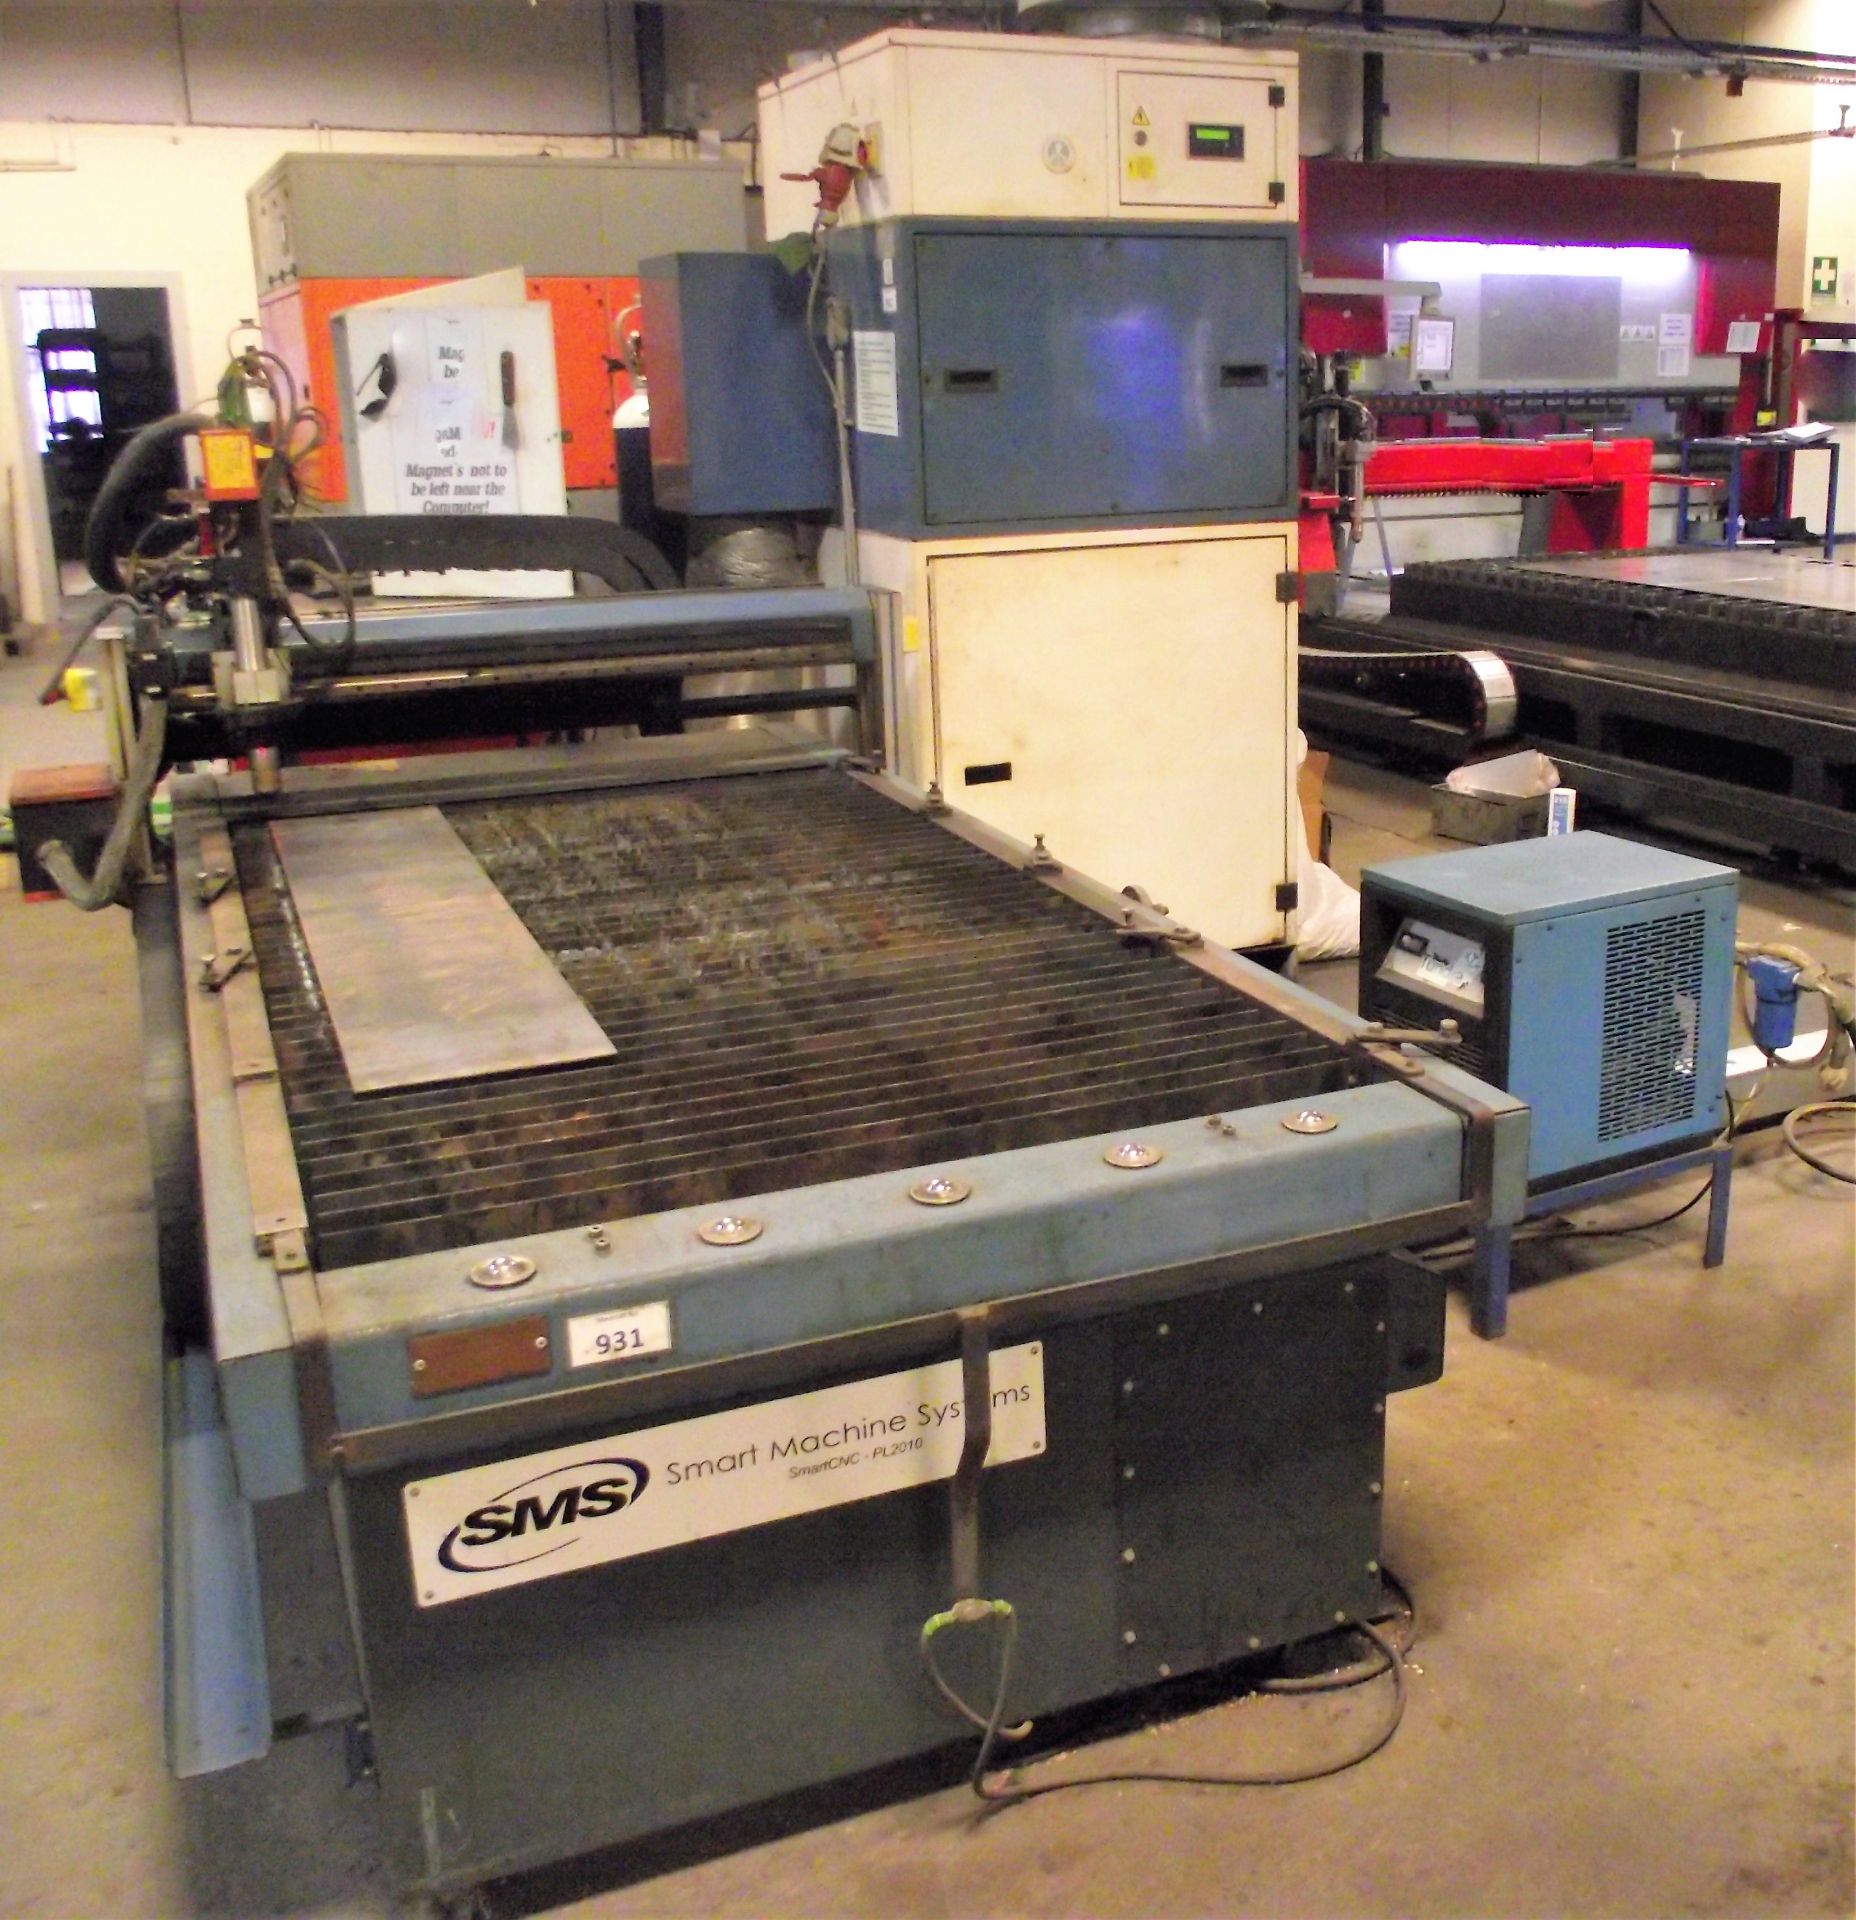 SMS Automation SP2010 PLASMA Cutter cw Support Equipment. - Image 23 of 24